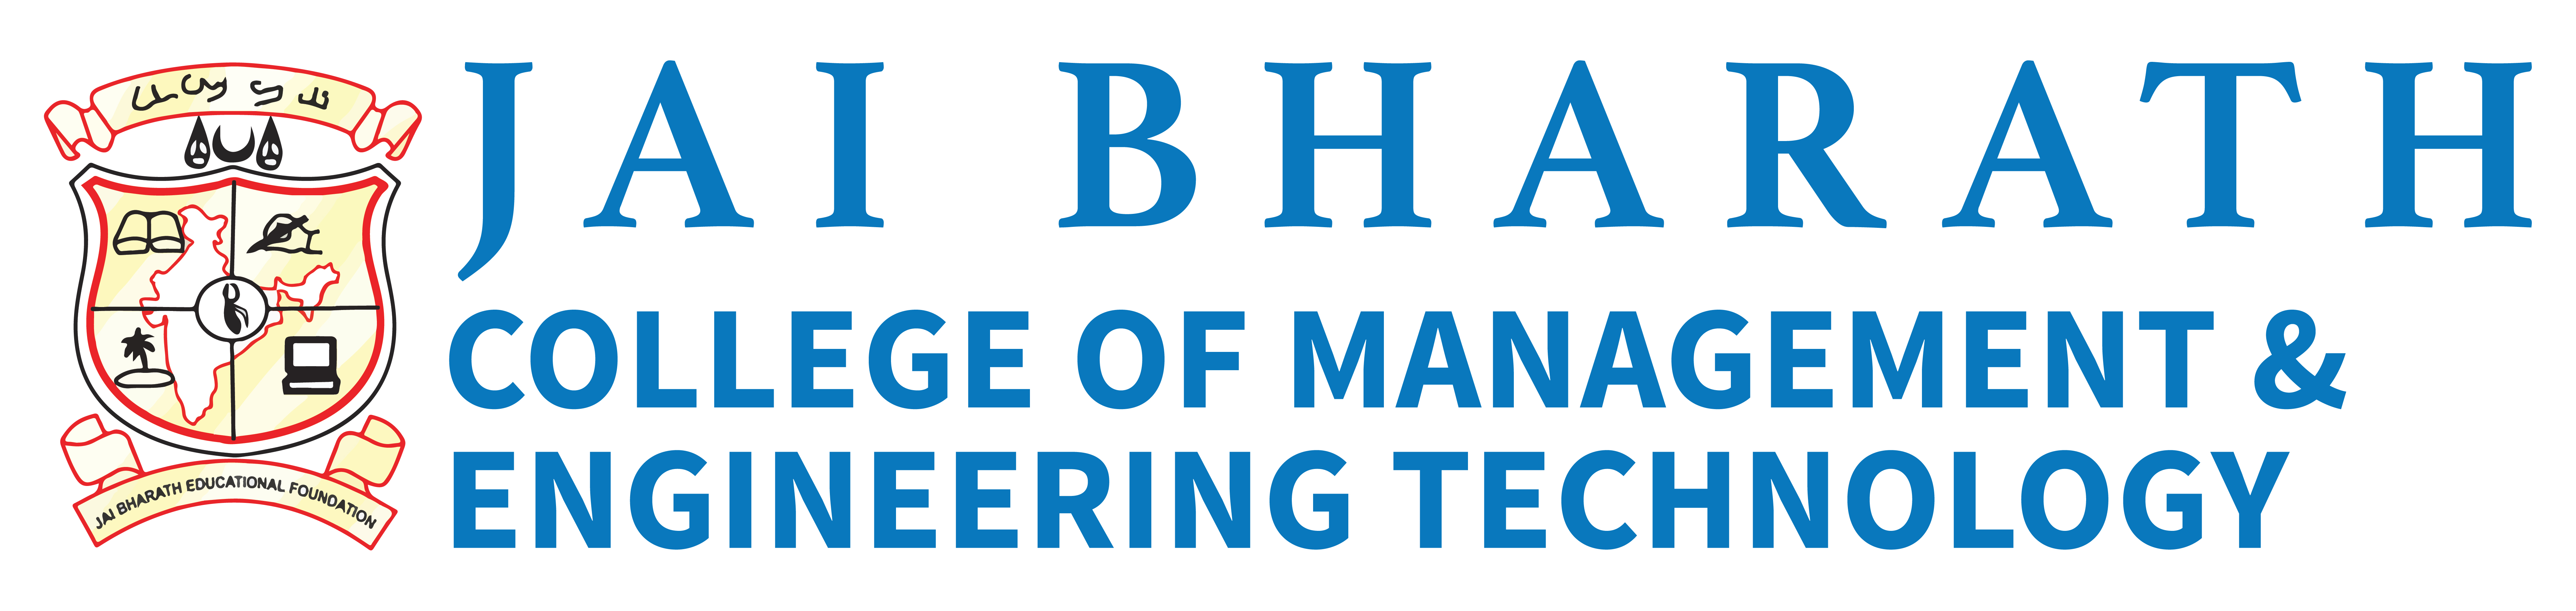 Jai Bharath College of Management and Engineering Technology Jobs 2019 - Apply Online for Assistant Professor Posts